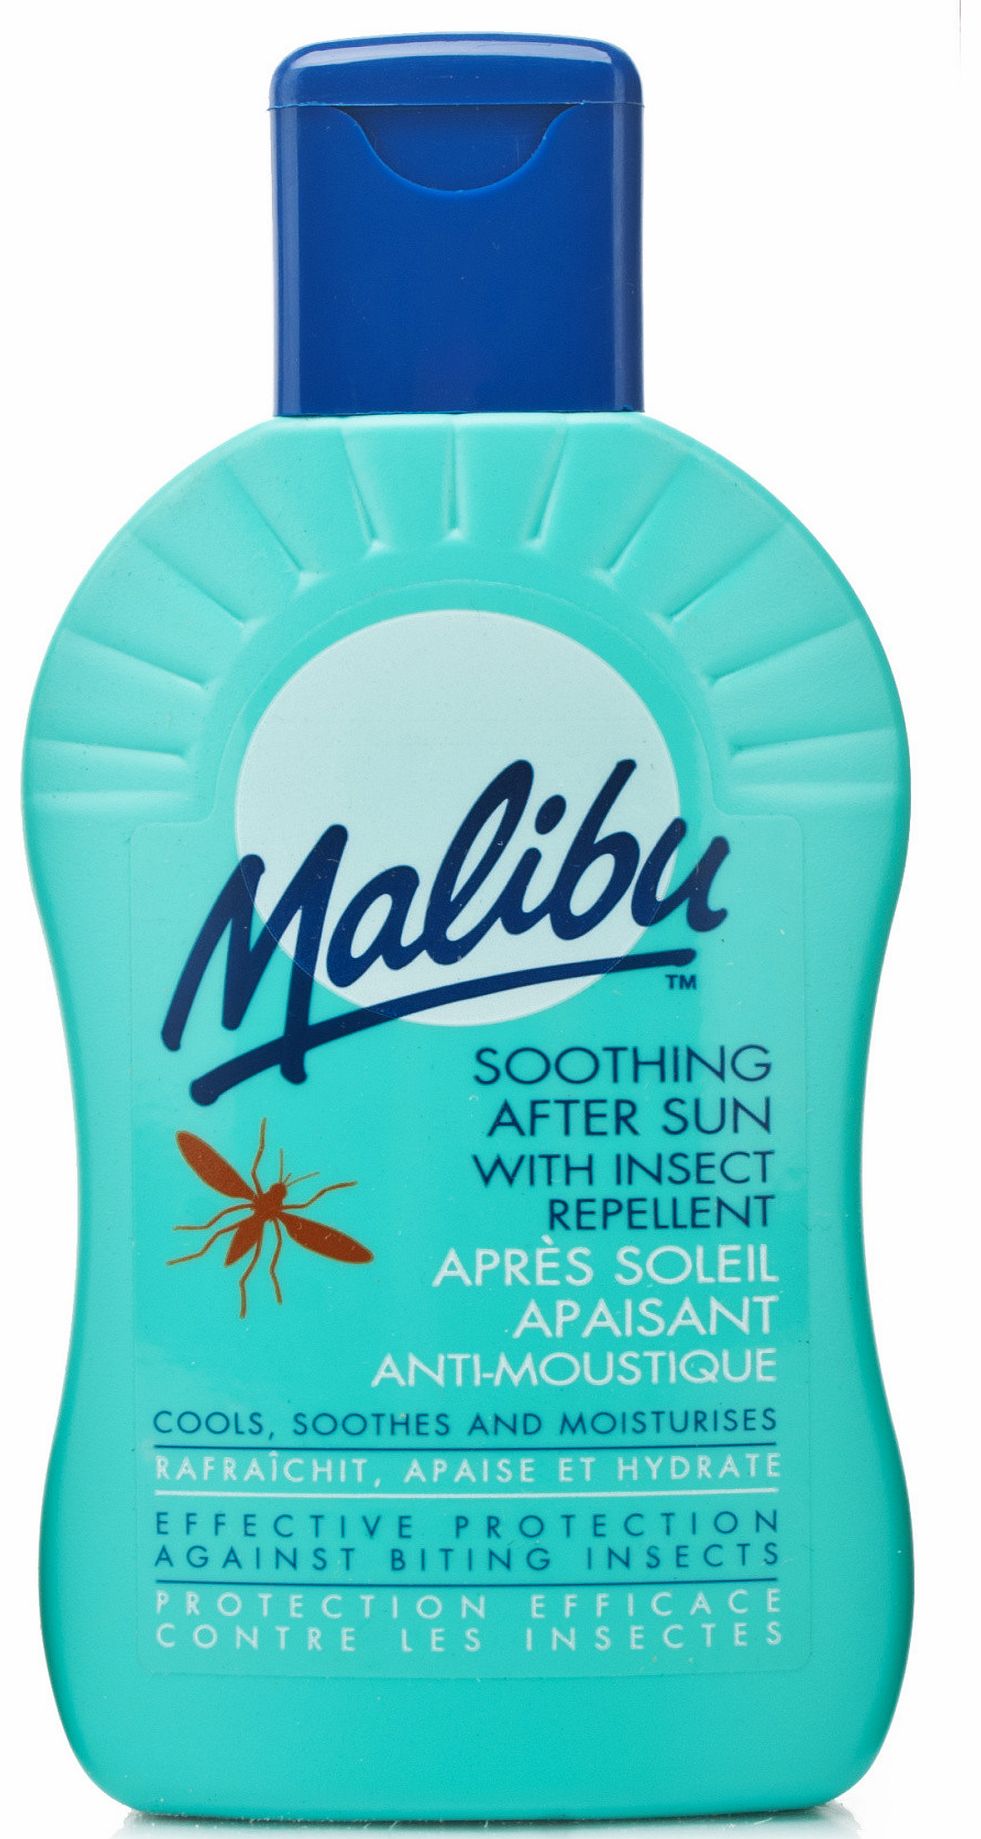 Aftersun with Insect Repellent